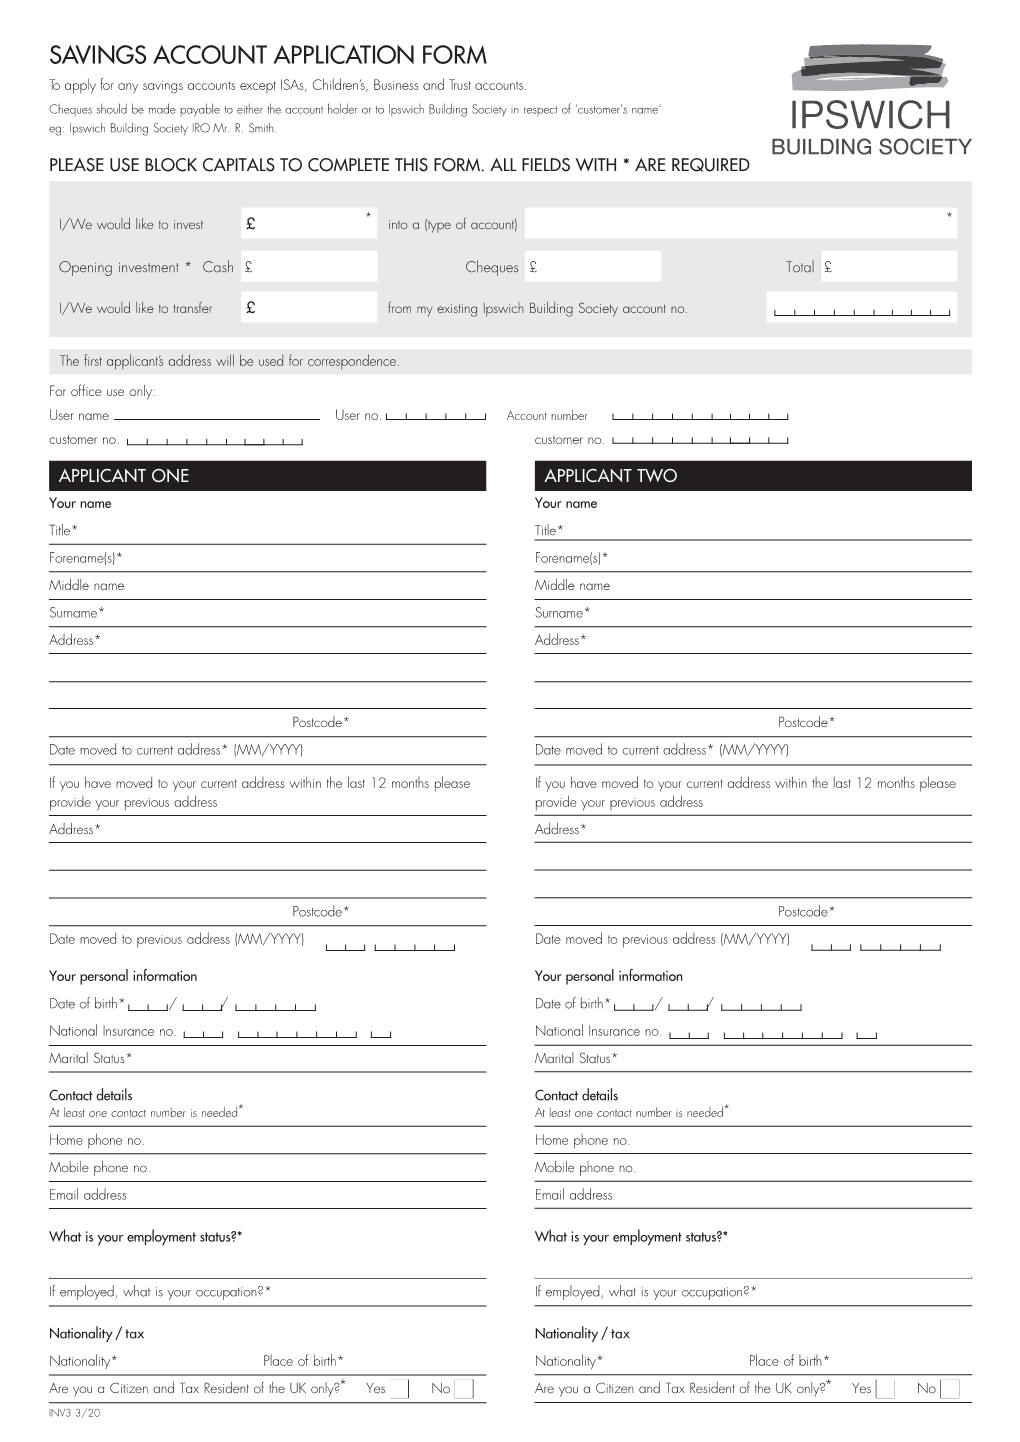 SAVINGS ACCOUNT APPLICATION FORM to Apply for Any Savings Accounts Except Isas, Children’S, Business and Trust Accounts